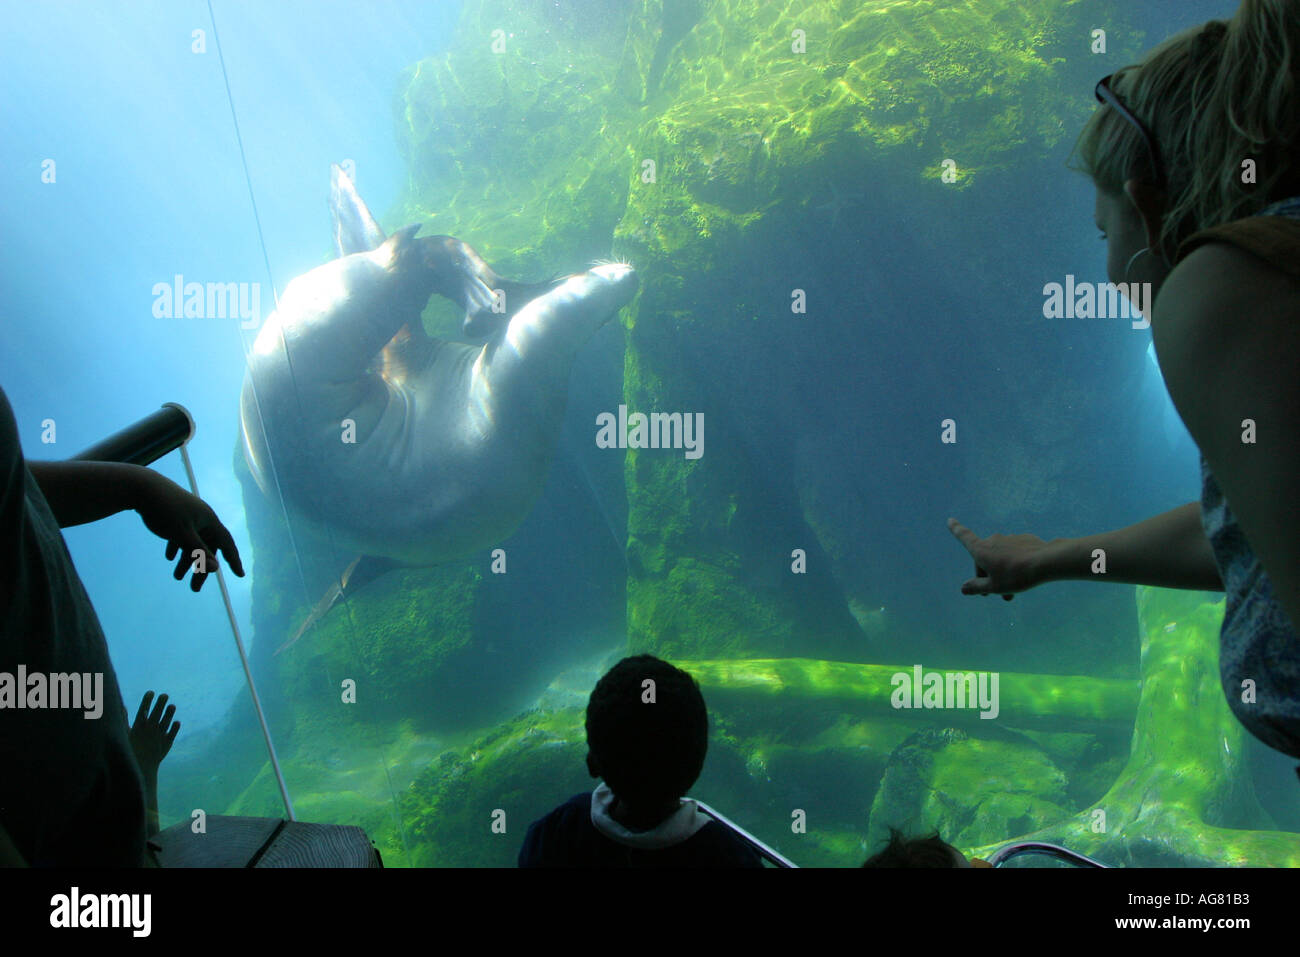 Visitors at the Oregon Zoo in Portland Oregon watch a sea lion perform in its large glass enclosure Stock Photo